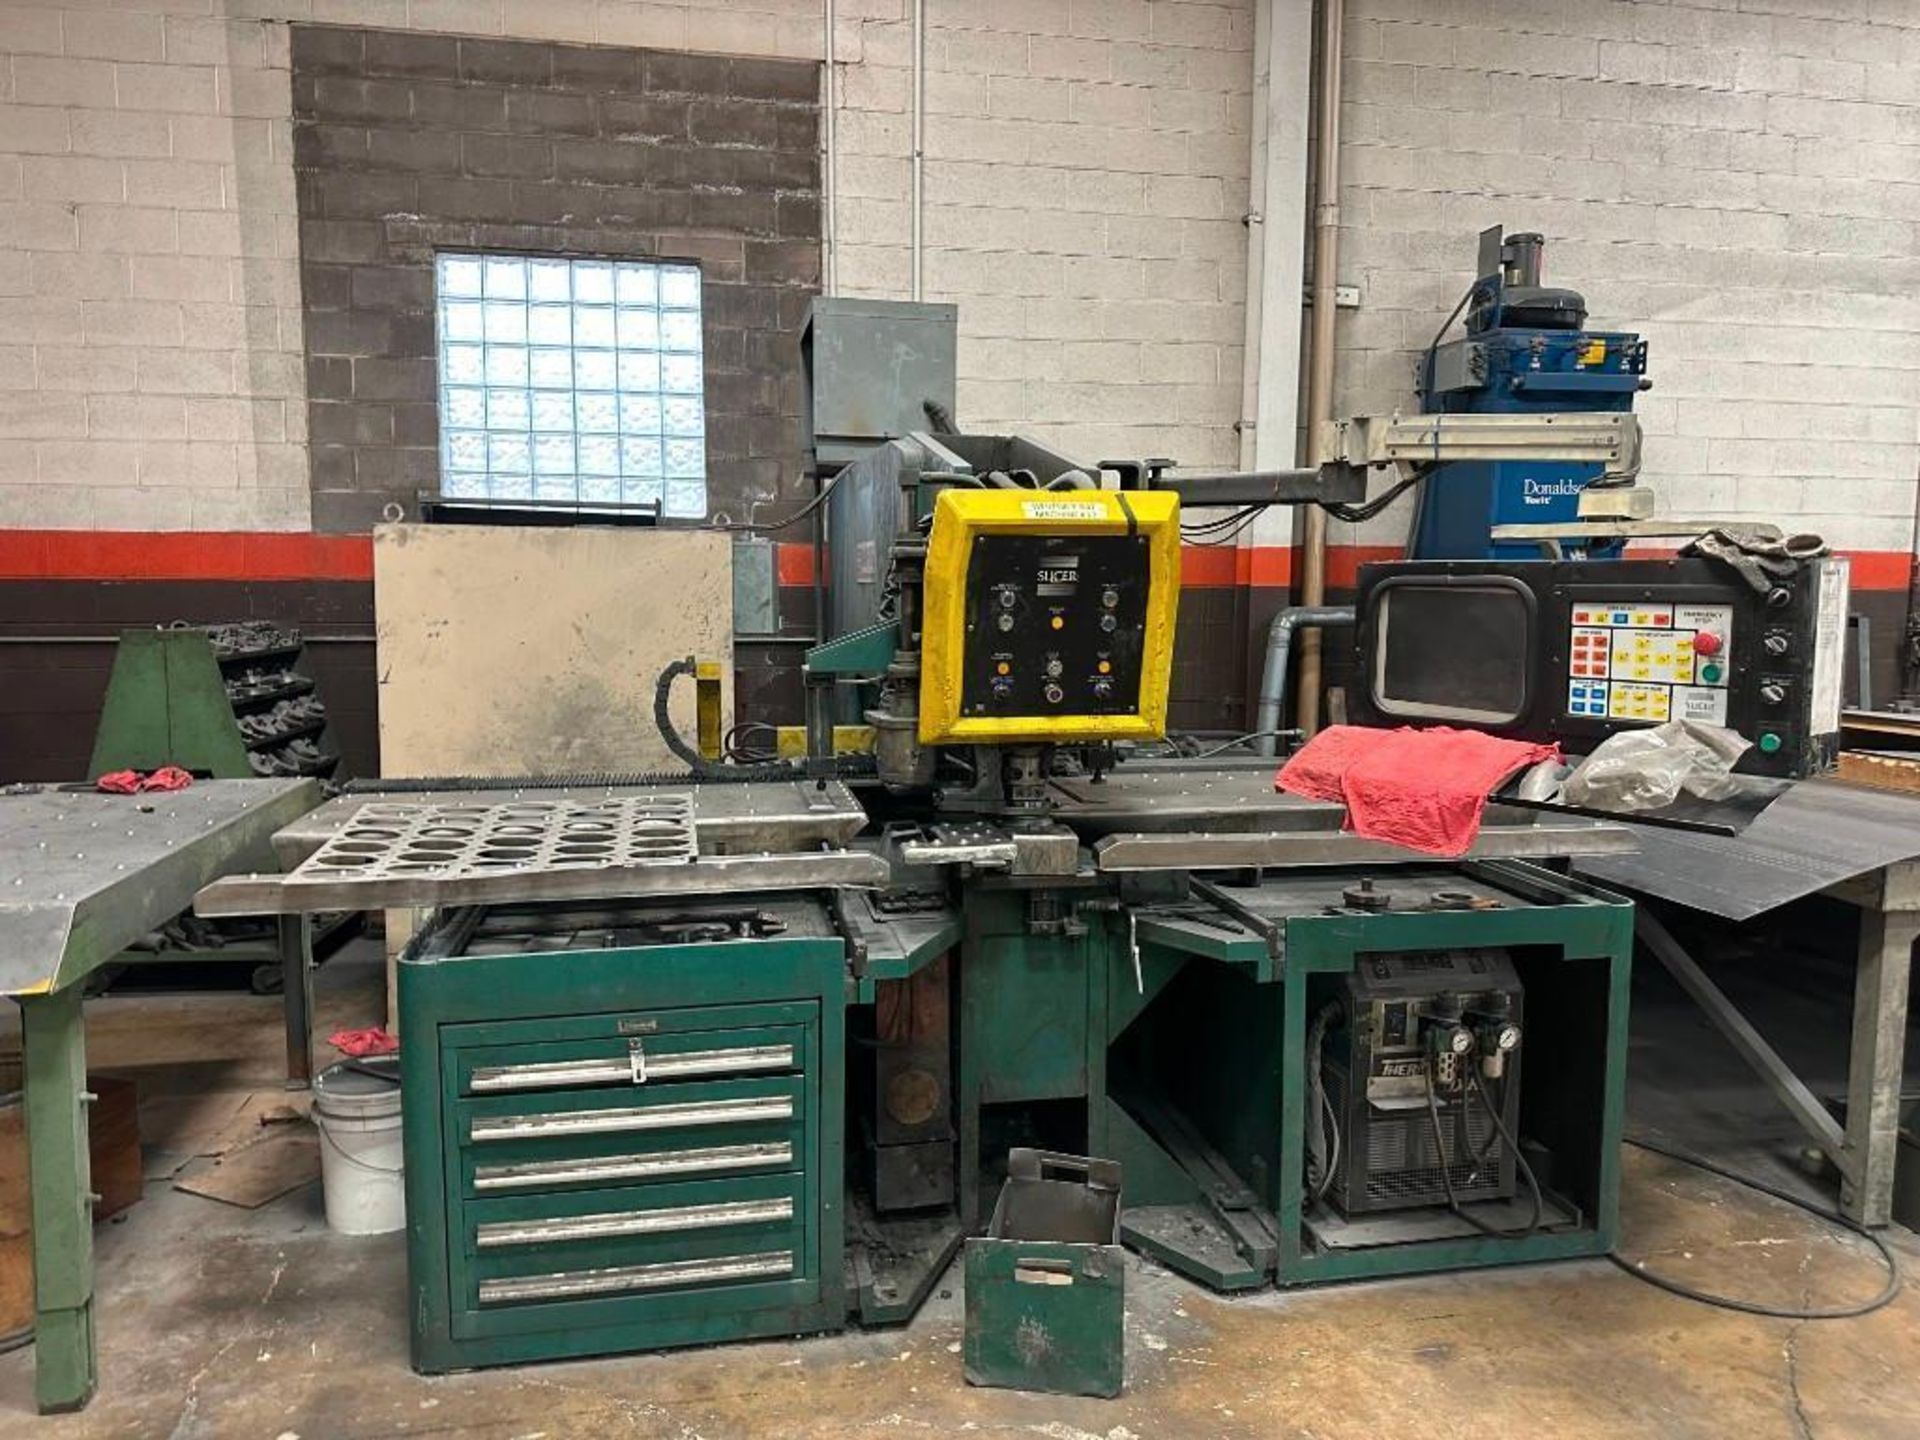 Whitman 847 Plasma Cutter with MANY accessories (located off-site, please read description) - Image 2 of 38